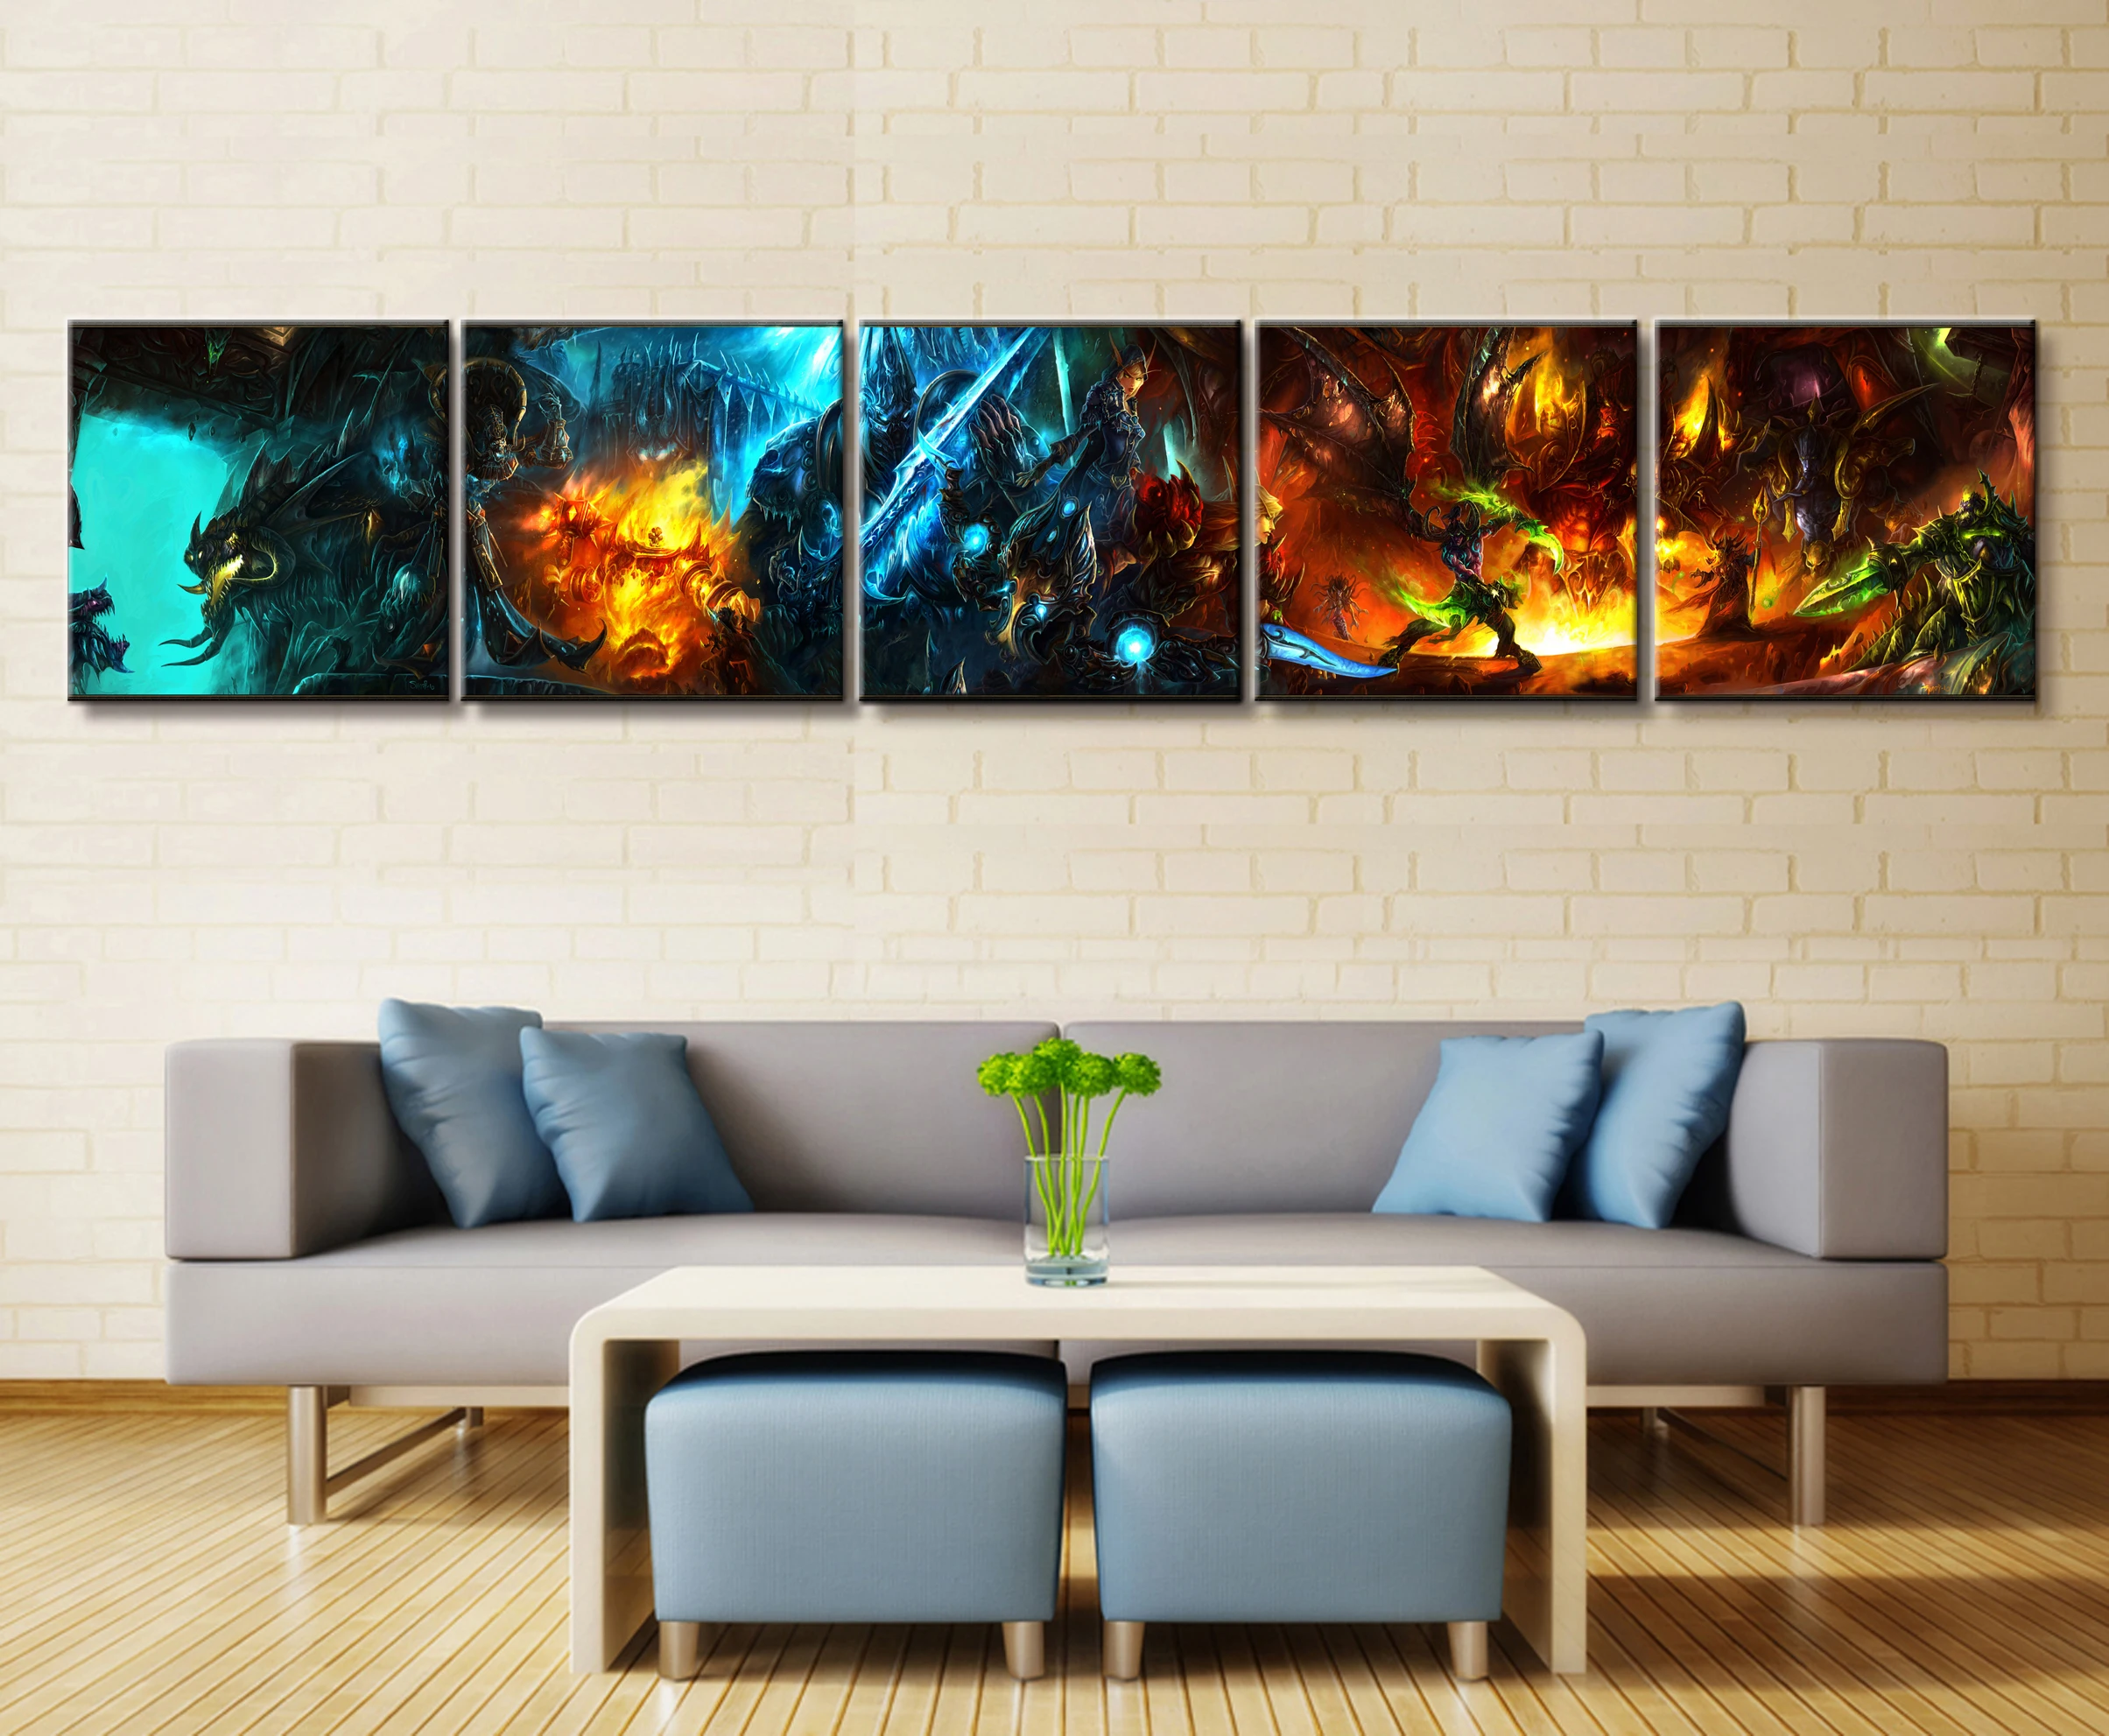 

5 Piece Video Game WOW Warcraft DOTA 2 Painting Poster Decorative Mural Art Room Wall Decor Canvas Painting Wholesale